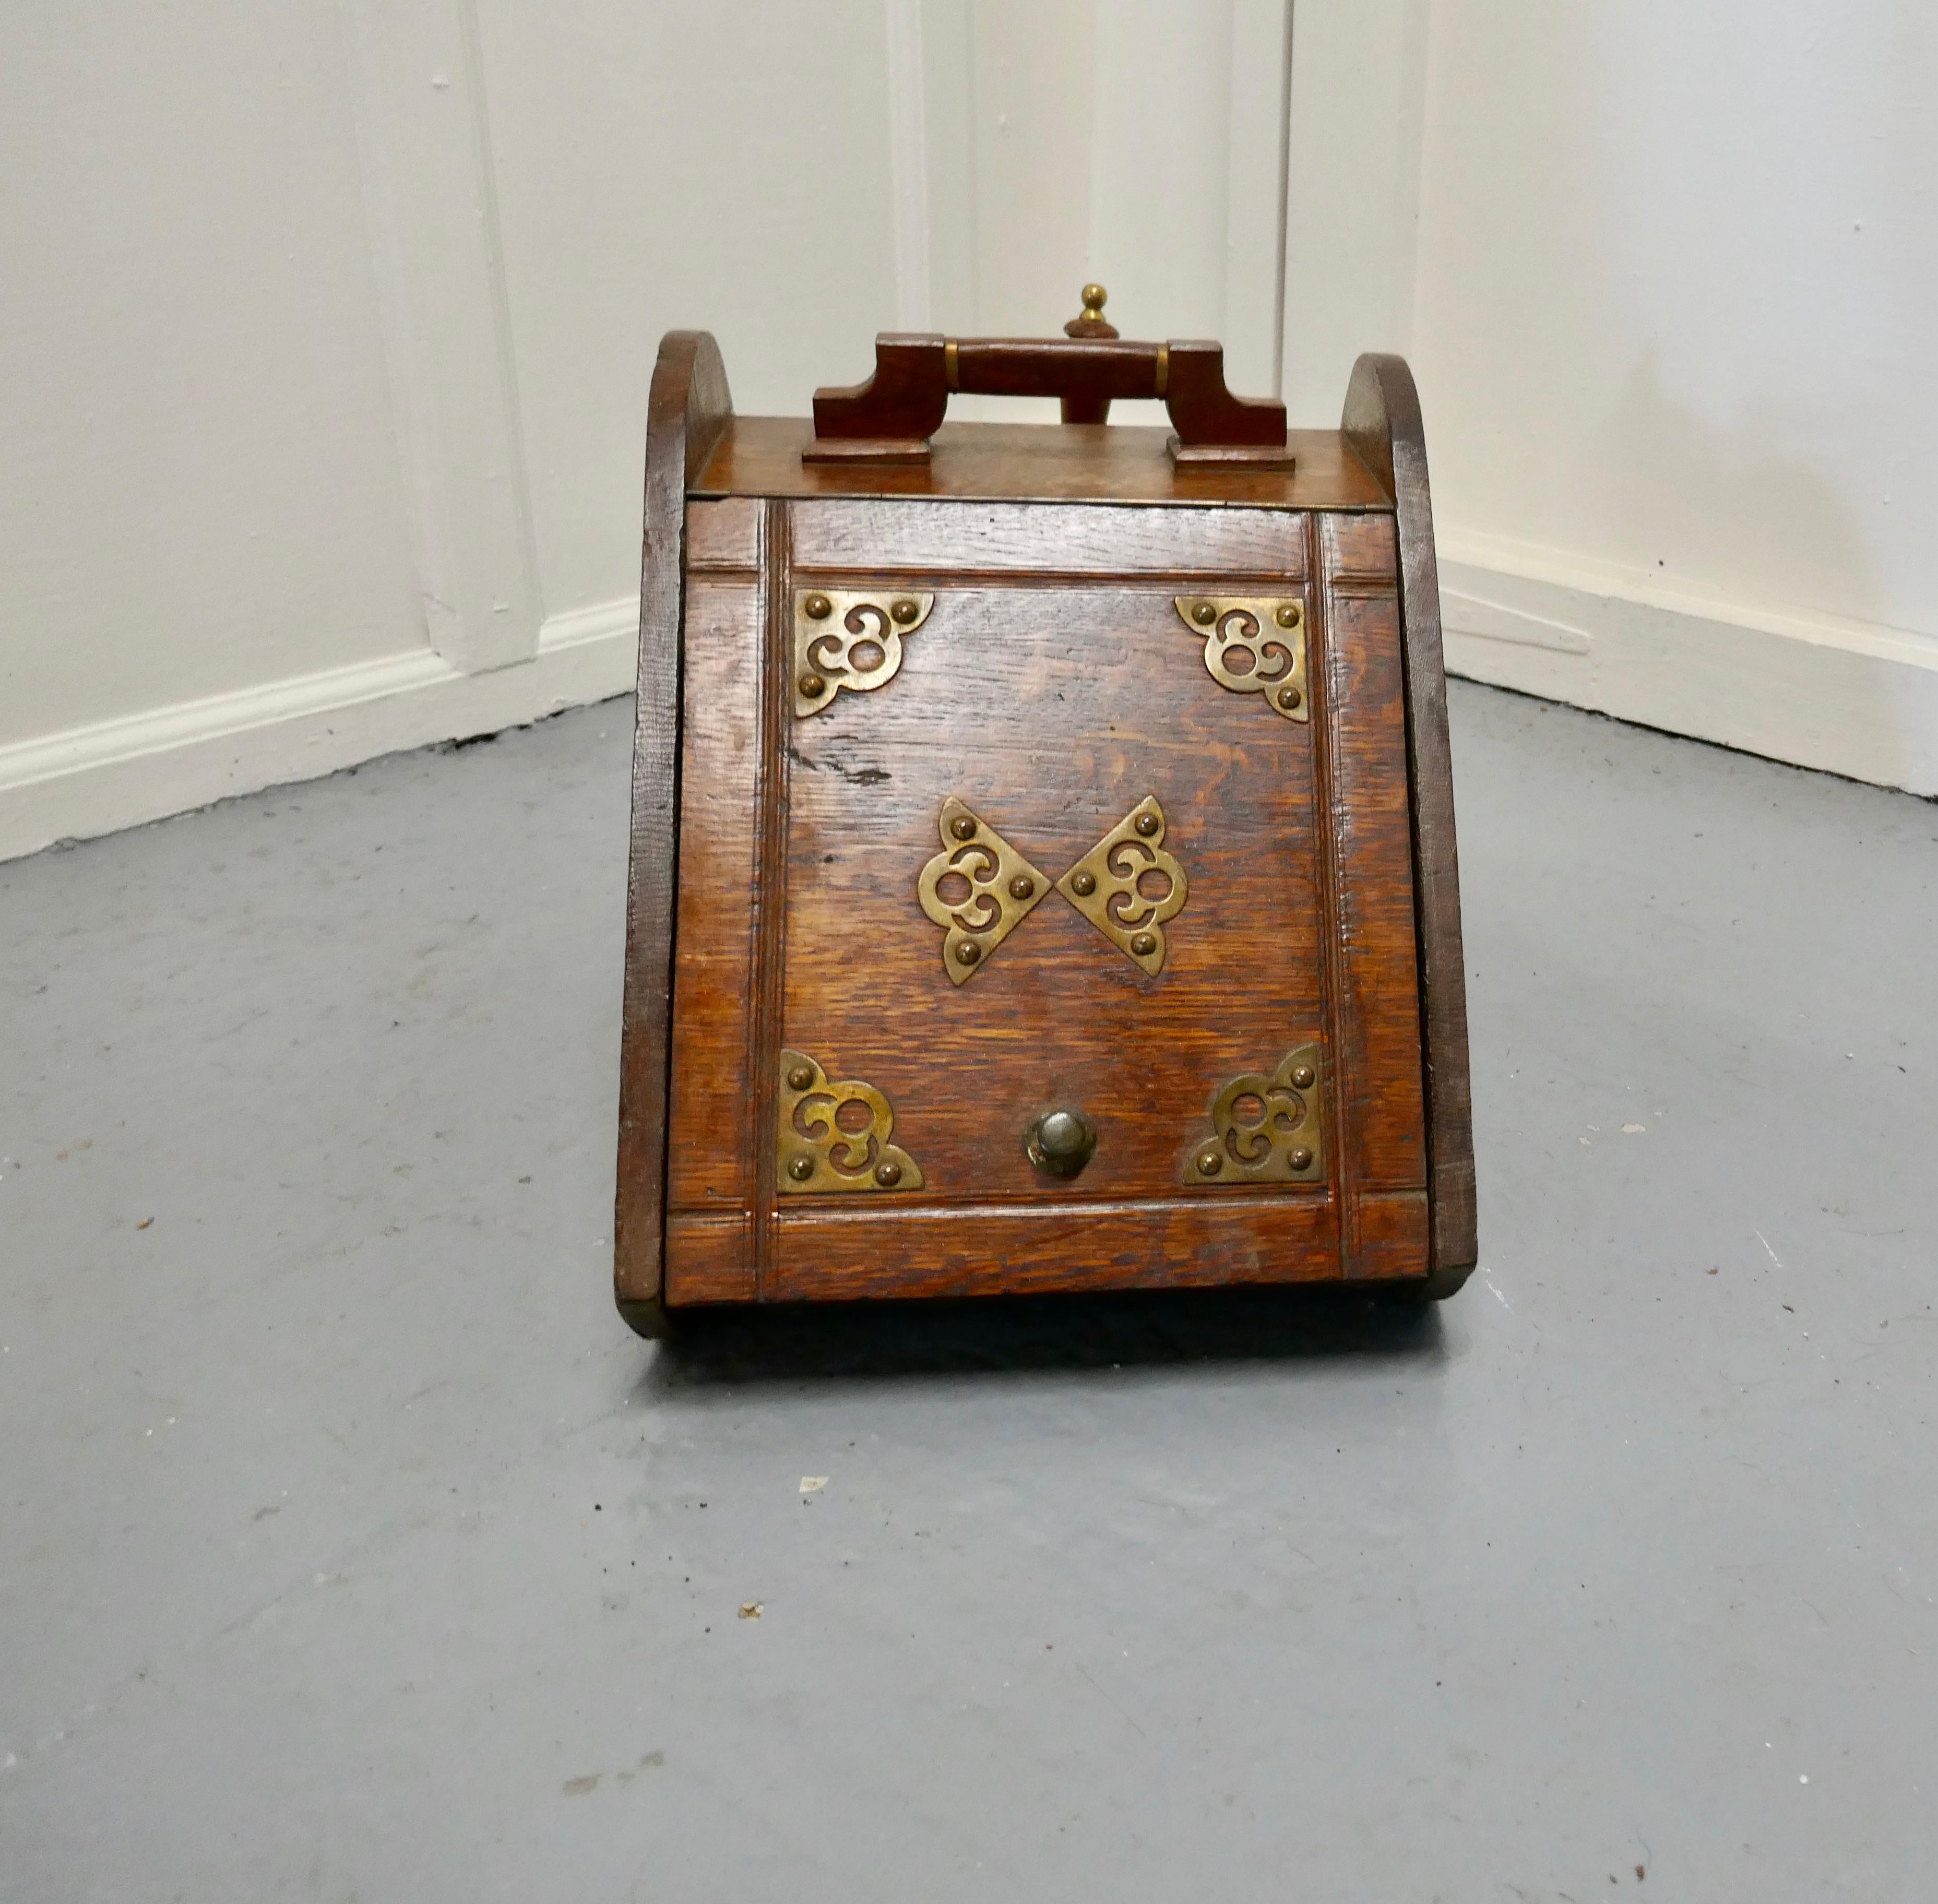 A Victorian oak coal box with liner and shovel

A charming piece of useful Victorian furniture
It has sloping front and back with a decorative brass detail on the front, and a shovel holder in the back and inside a 2 handled metal liner 
It is in